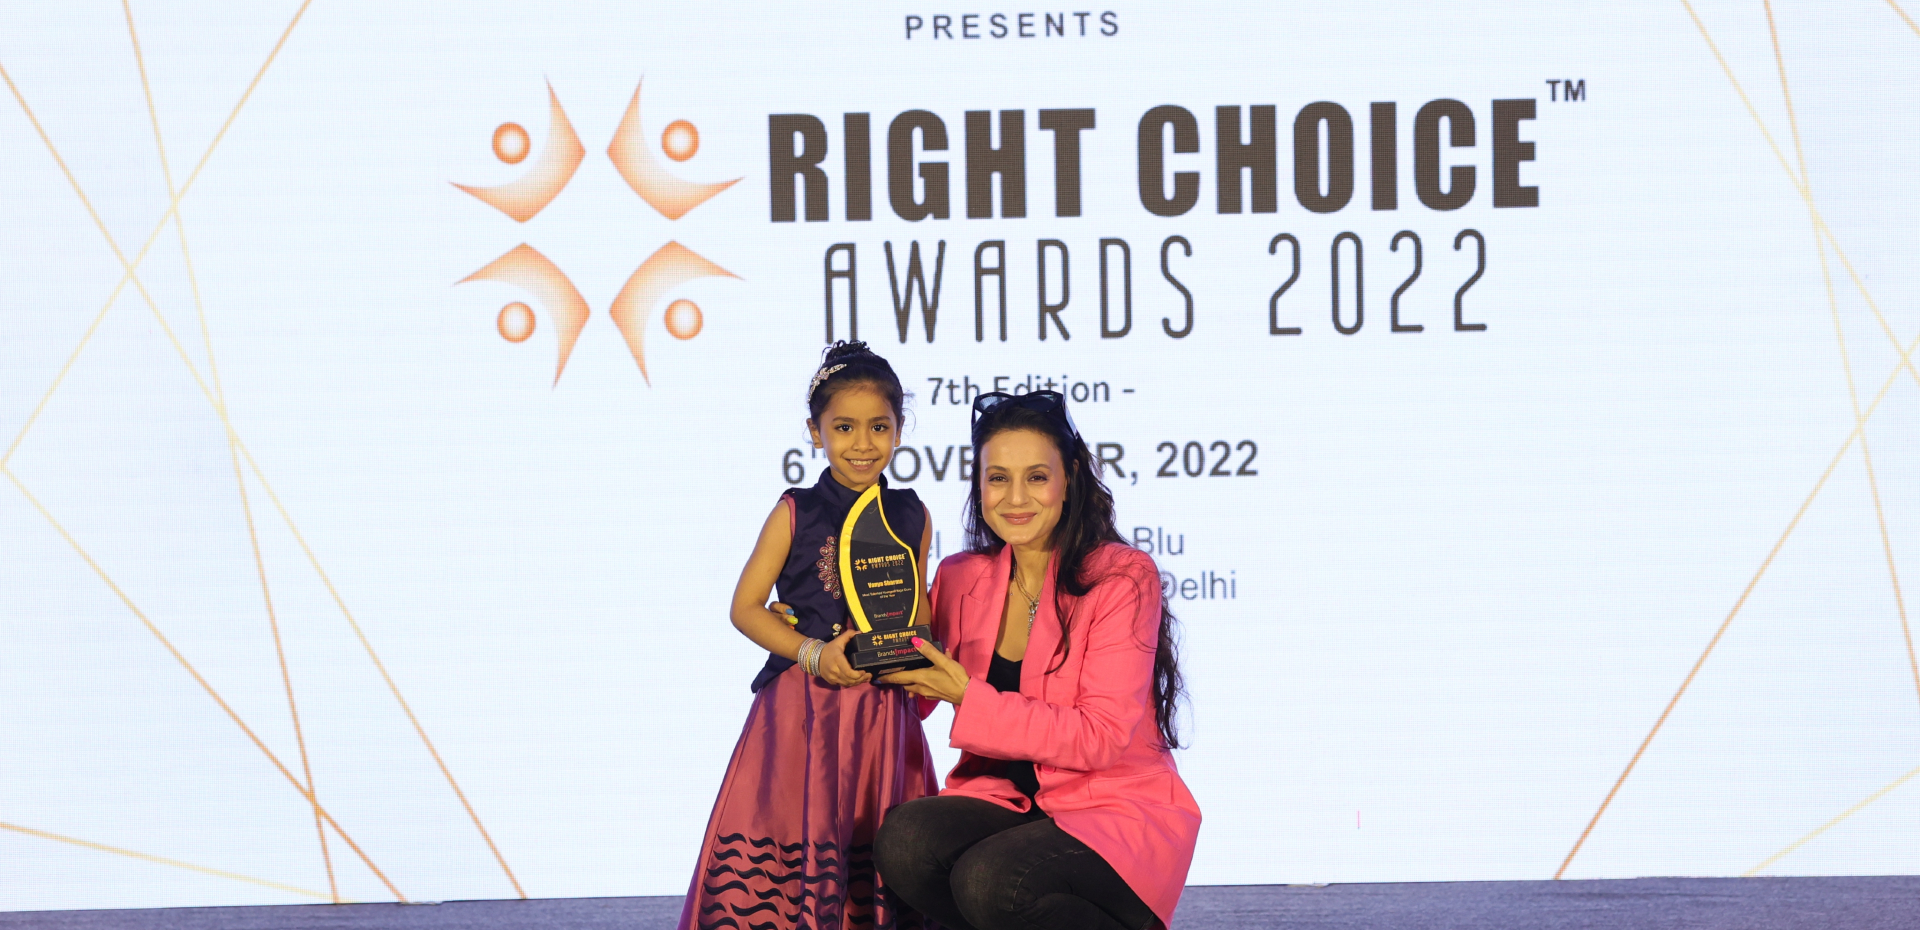 Ameesha Patel in Rightchoice Awards.